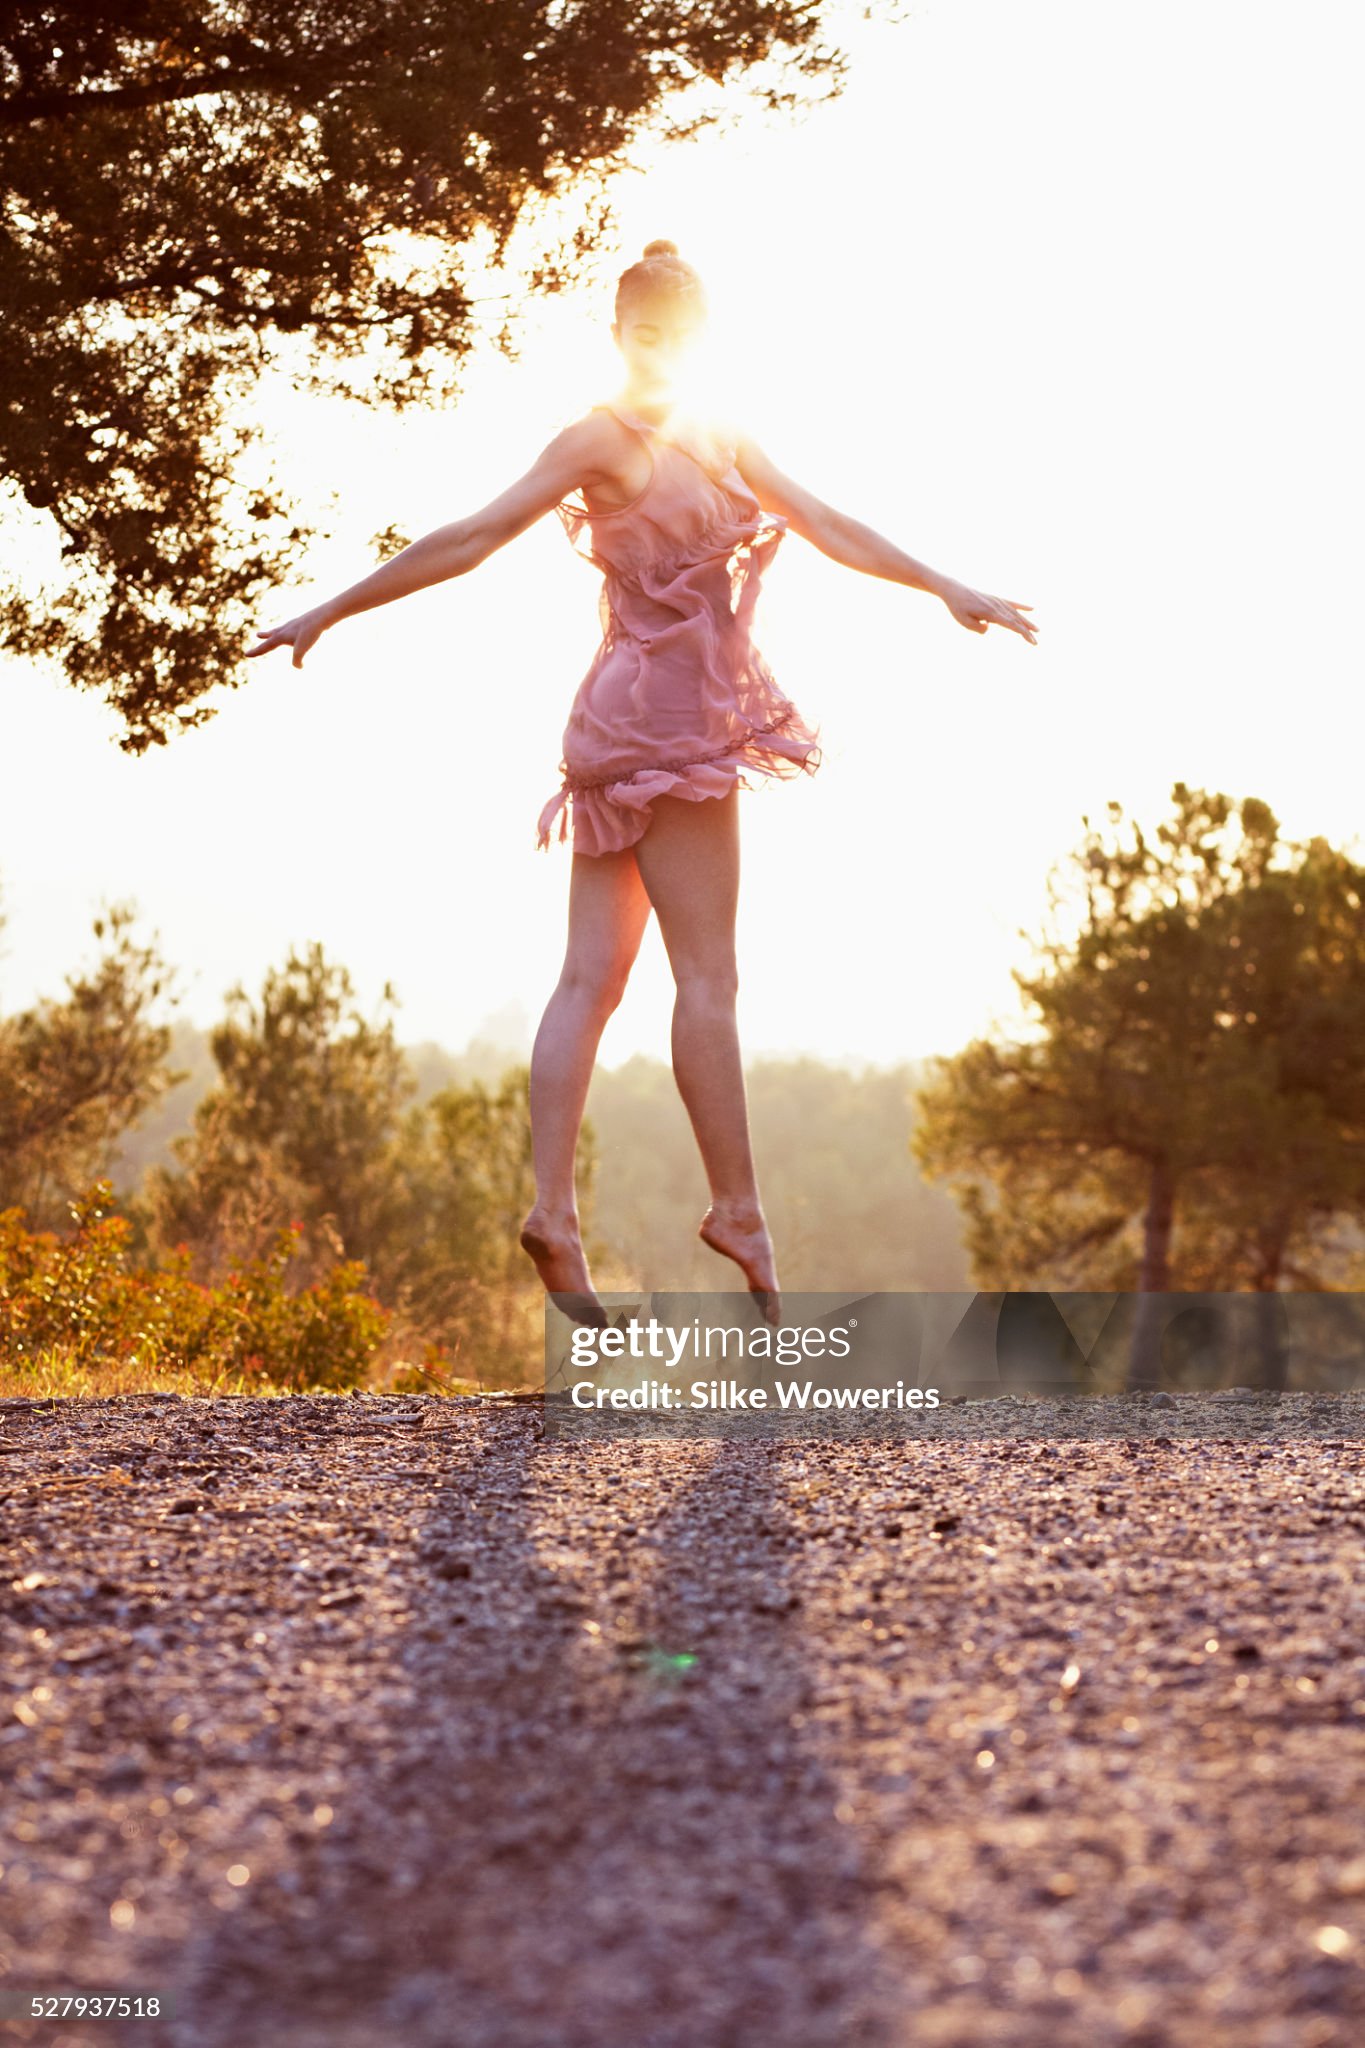 https://media.gettyimages.com/id/527937518/photo/young-woman-dancing-at-sunset.jpg?s=2048x2048&amp;w=gi&amp;k=20&amp;c=Xy565FpeYePPYo83m1PtDy0iUotex_-l0cYsad_iowM=